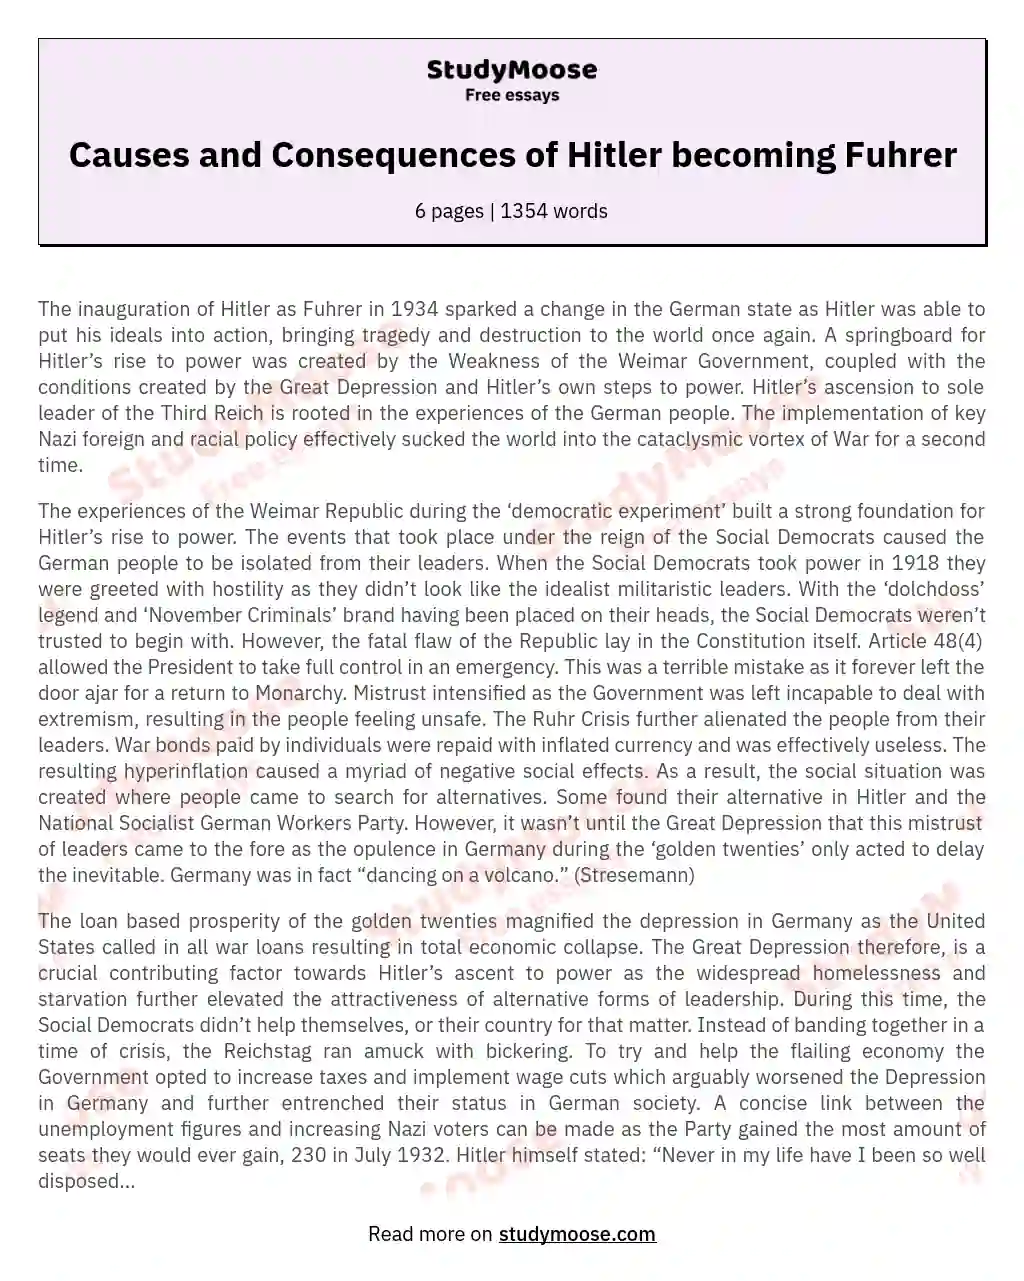 Causes and Consequences of Hitler becoming Fuhrer essay